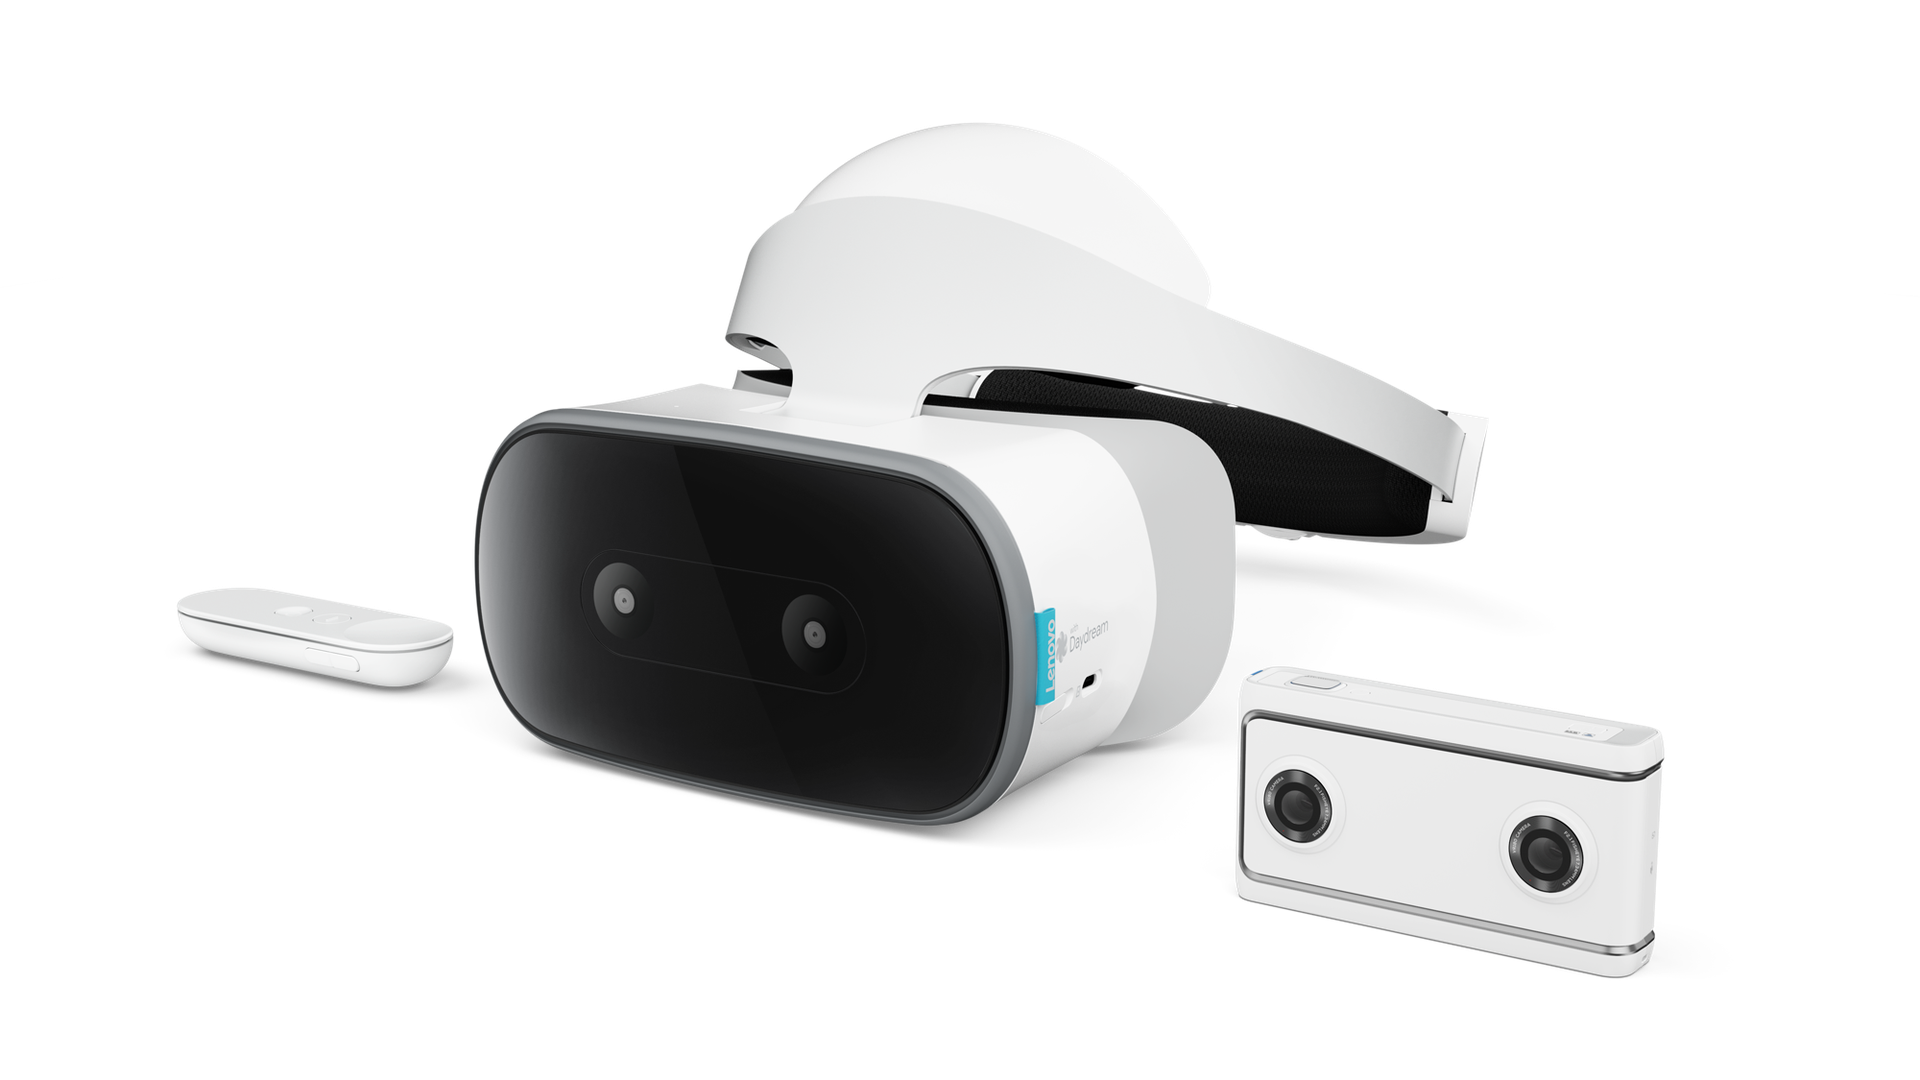 Lenovo's new standalone VR headset and camera, developed with Google